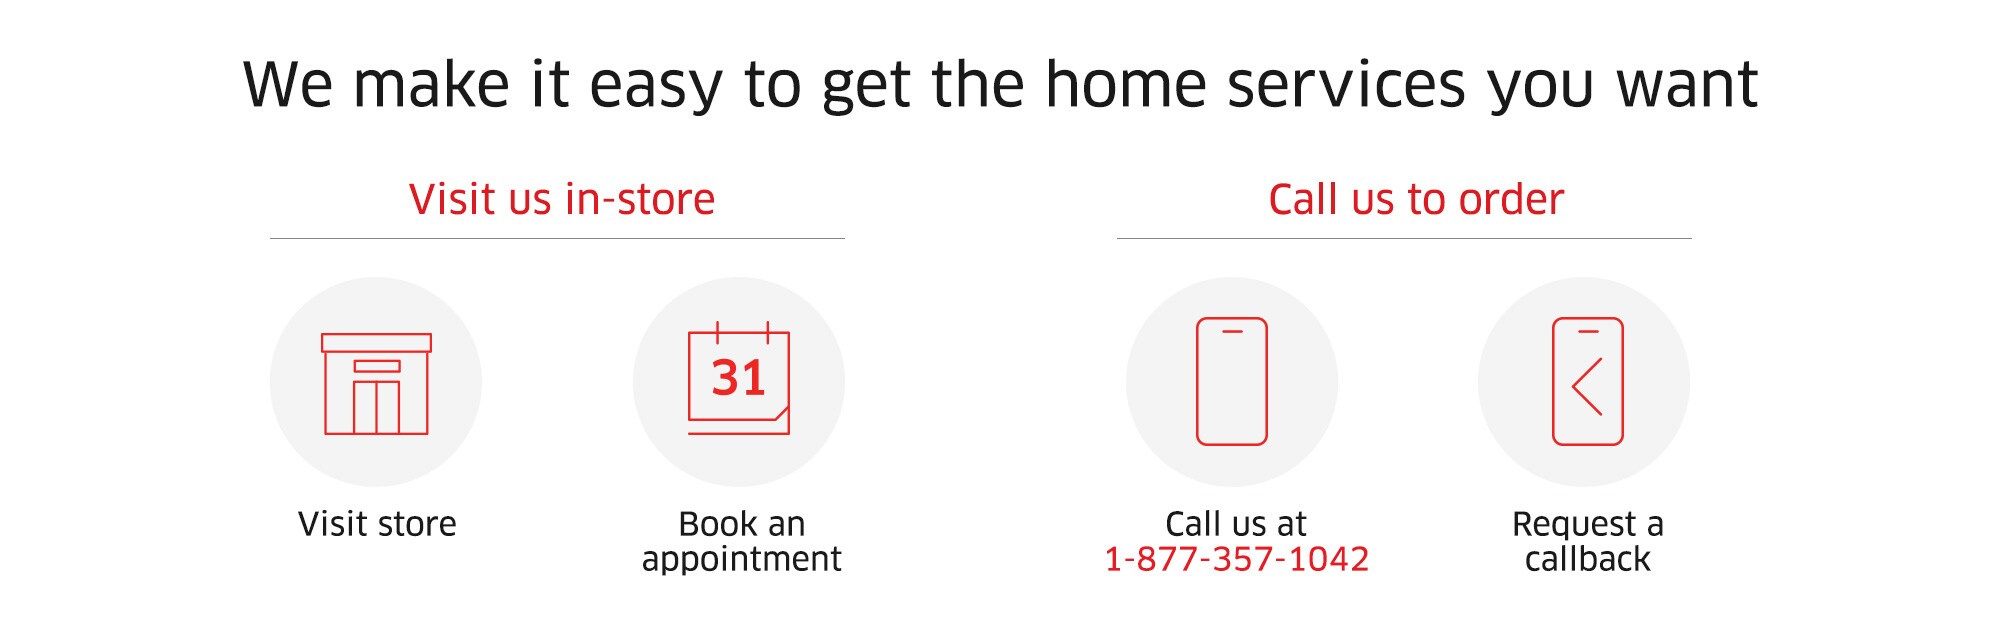 We make it easy to get the home services you want